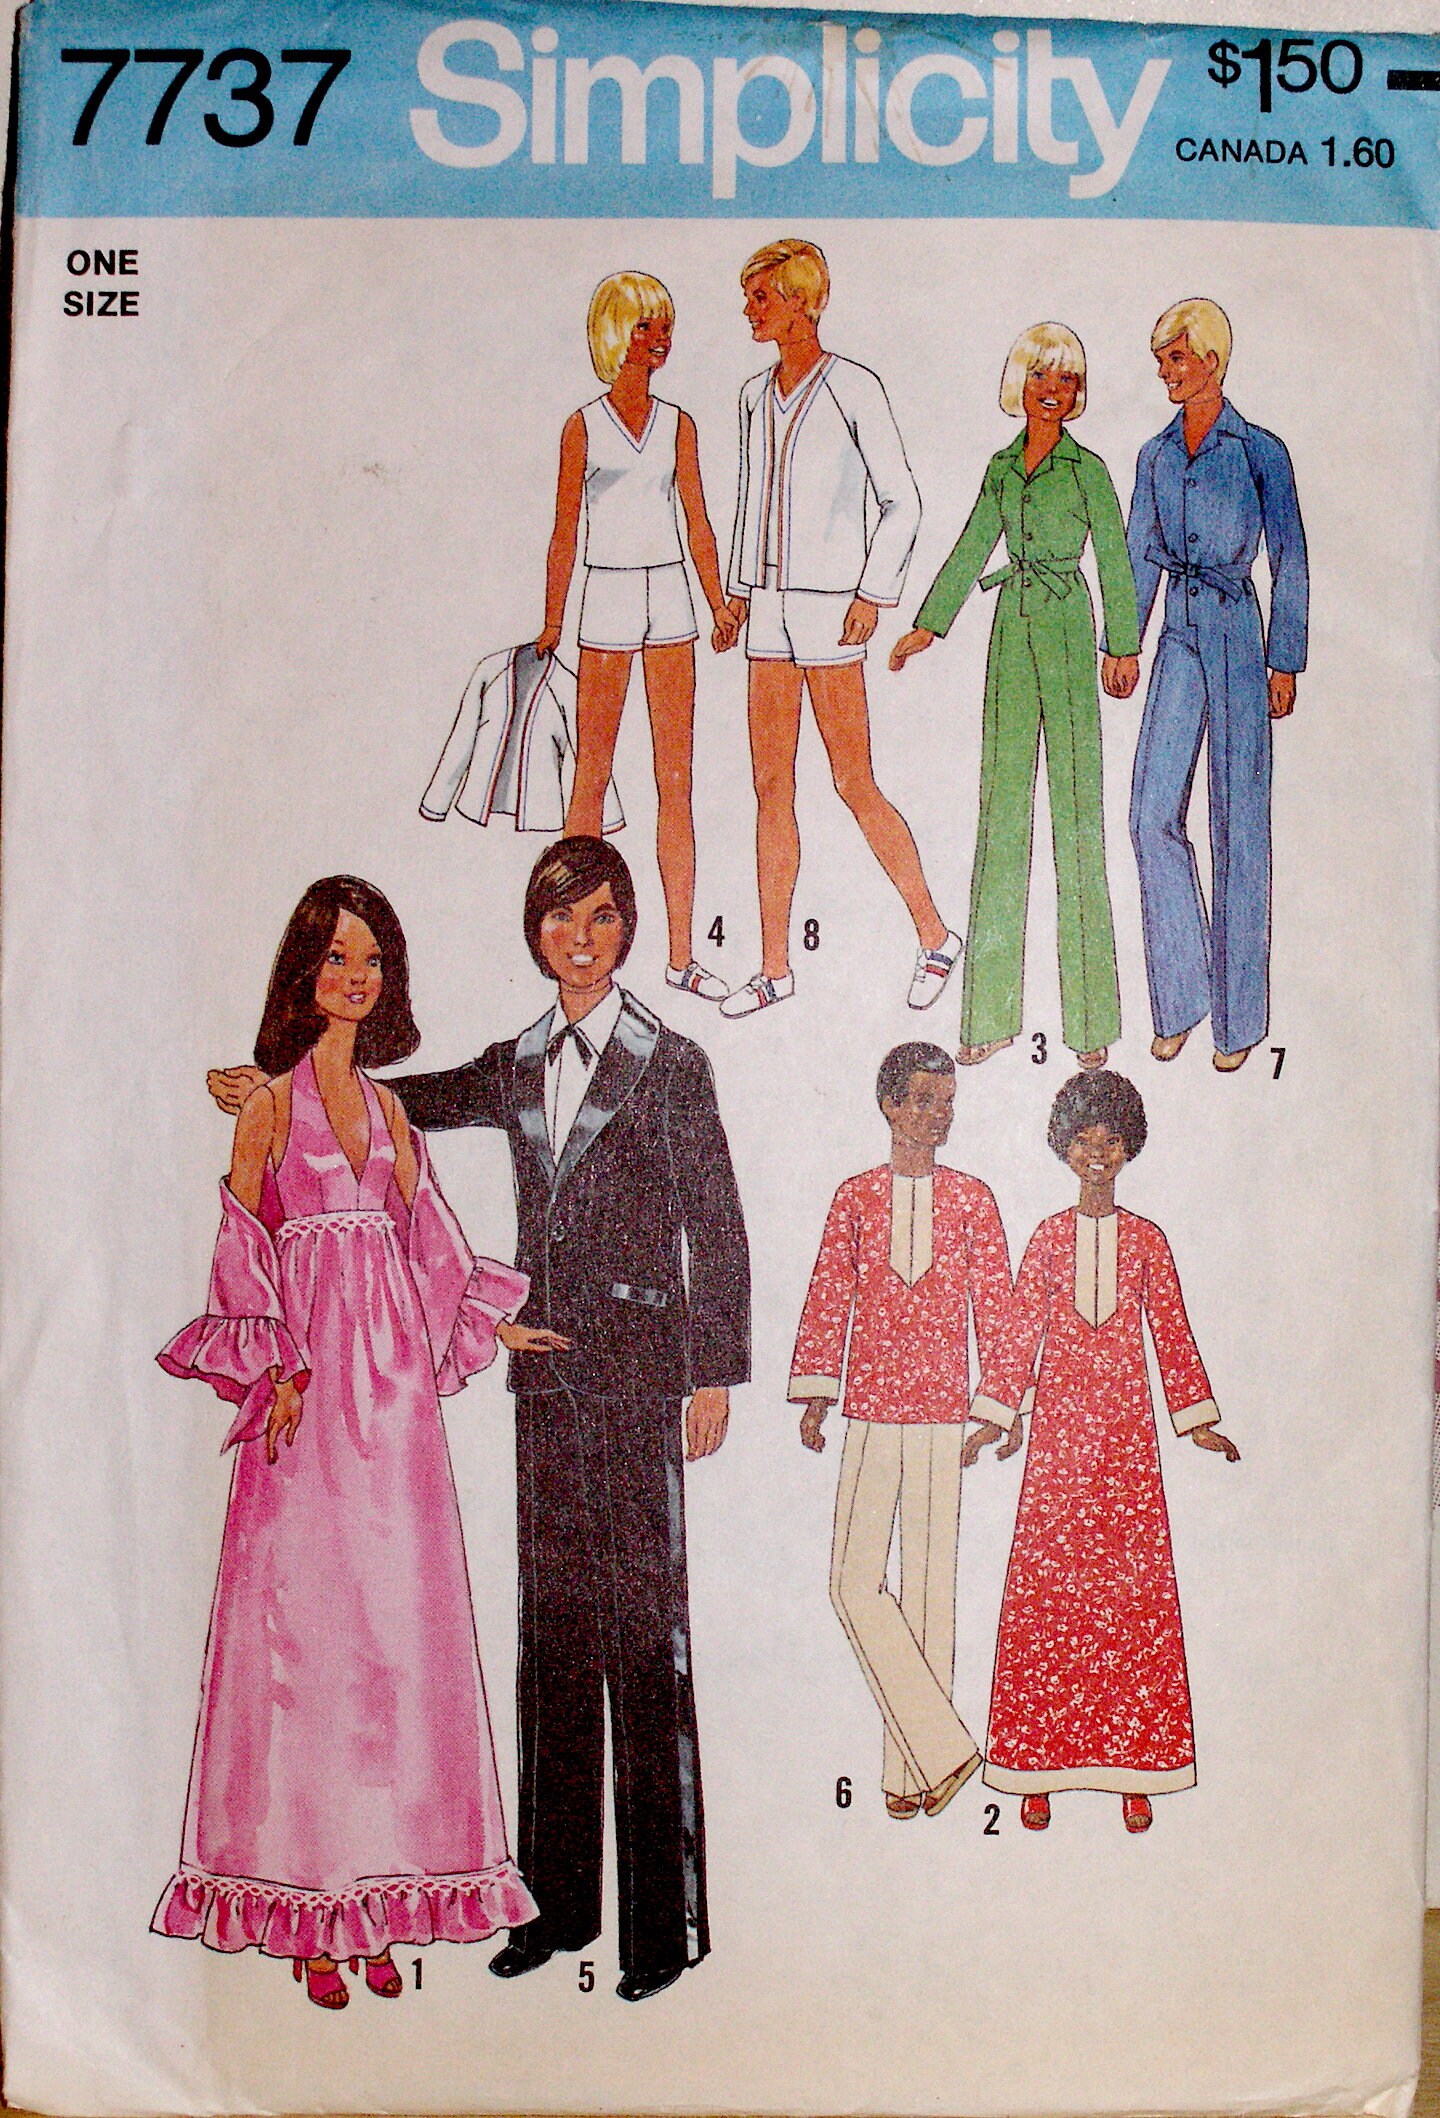 Barbie and Ken PDF Sewing Patterns Fits Fashion Size Teen Dolls 11 Inches  Tall tammy, Sindy, Francie, Babette, Wendy, Babs, Cher 2580 